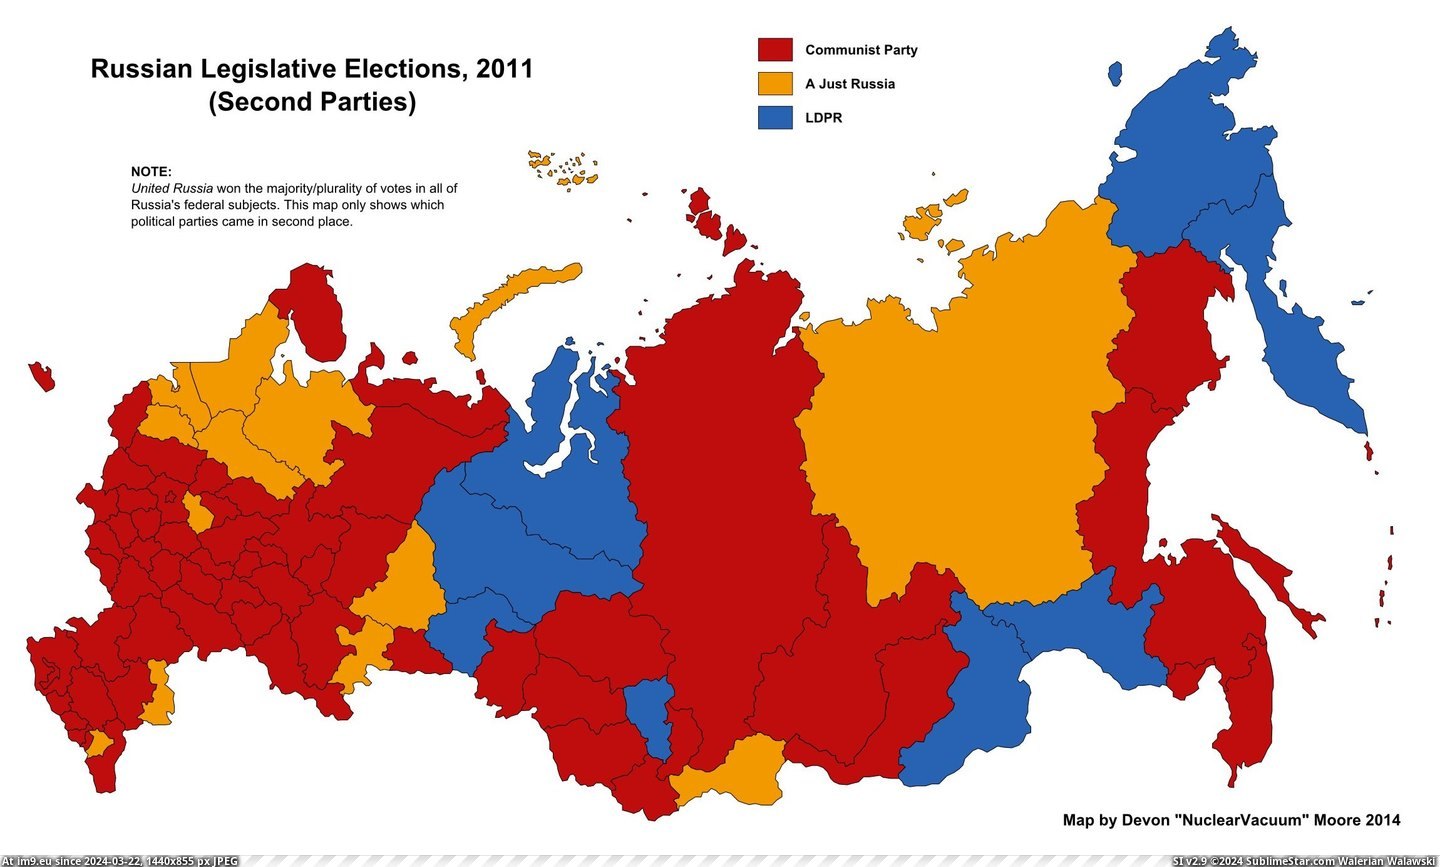 #Place #Russian #Parties #Legislative #Election #Notes [Mapporn] Second Place Parties in the 2011 Russian Legislative Election (Notes in Comments) [OC] [2300x1377] Pic. (Image of album My r/MAPS favs))